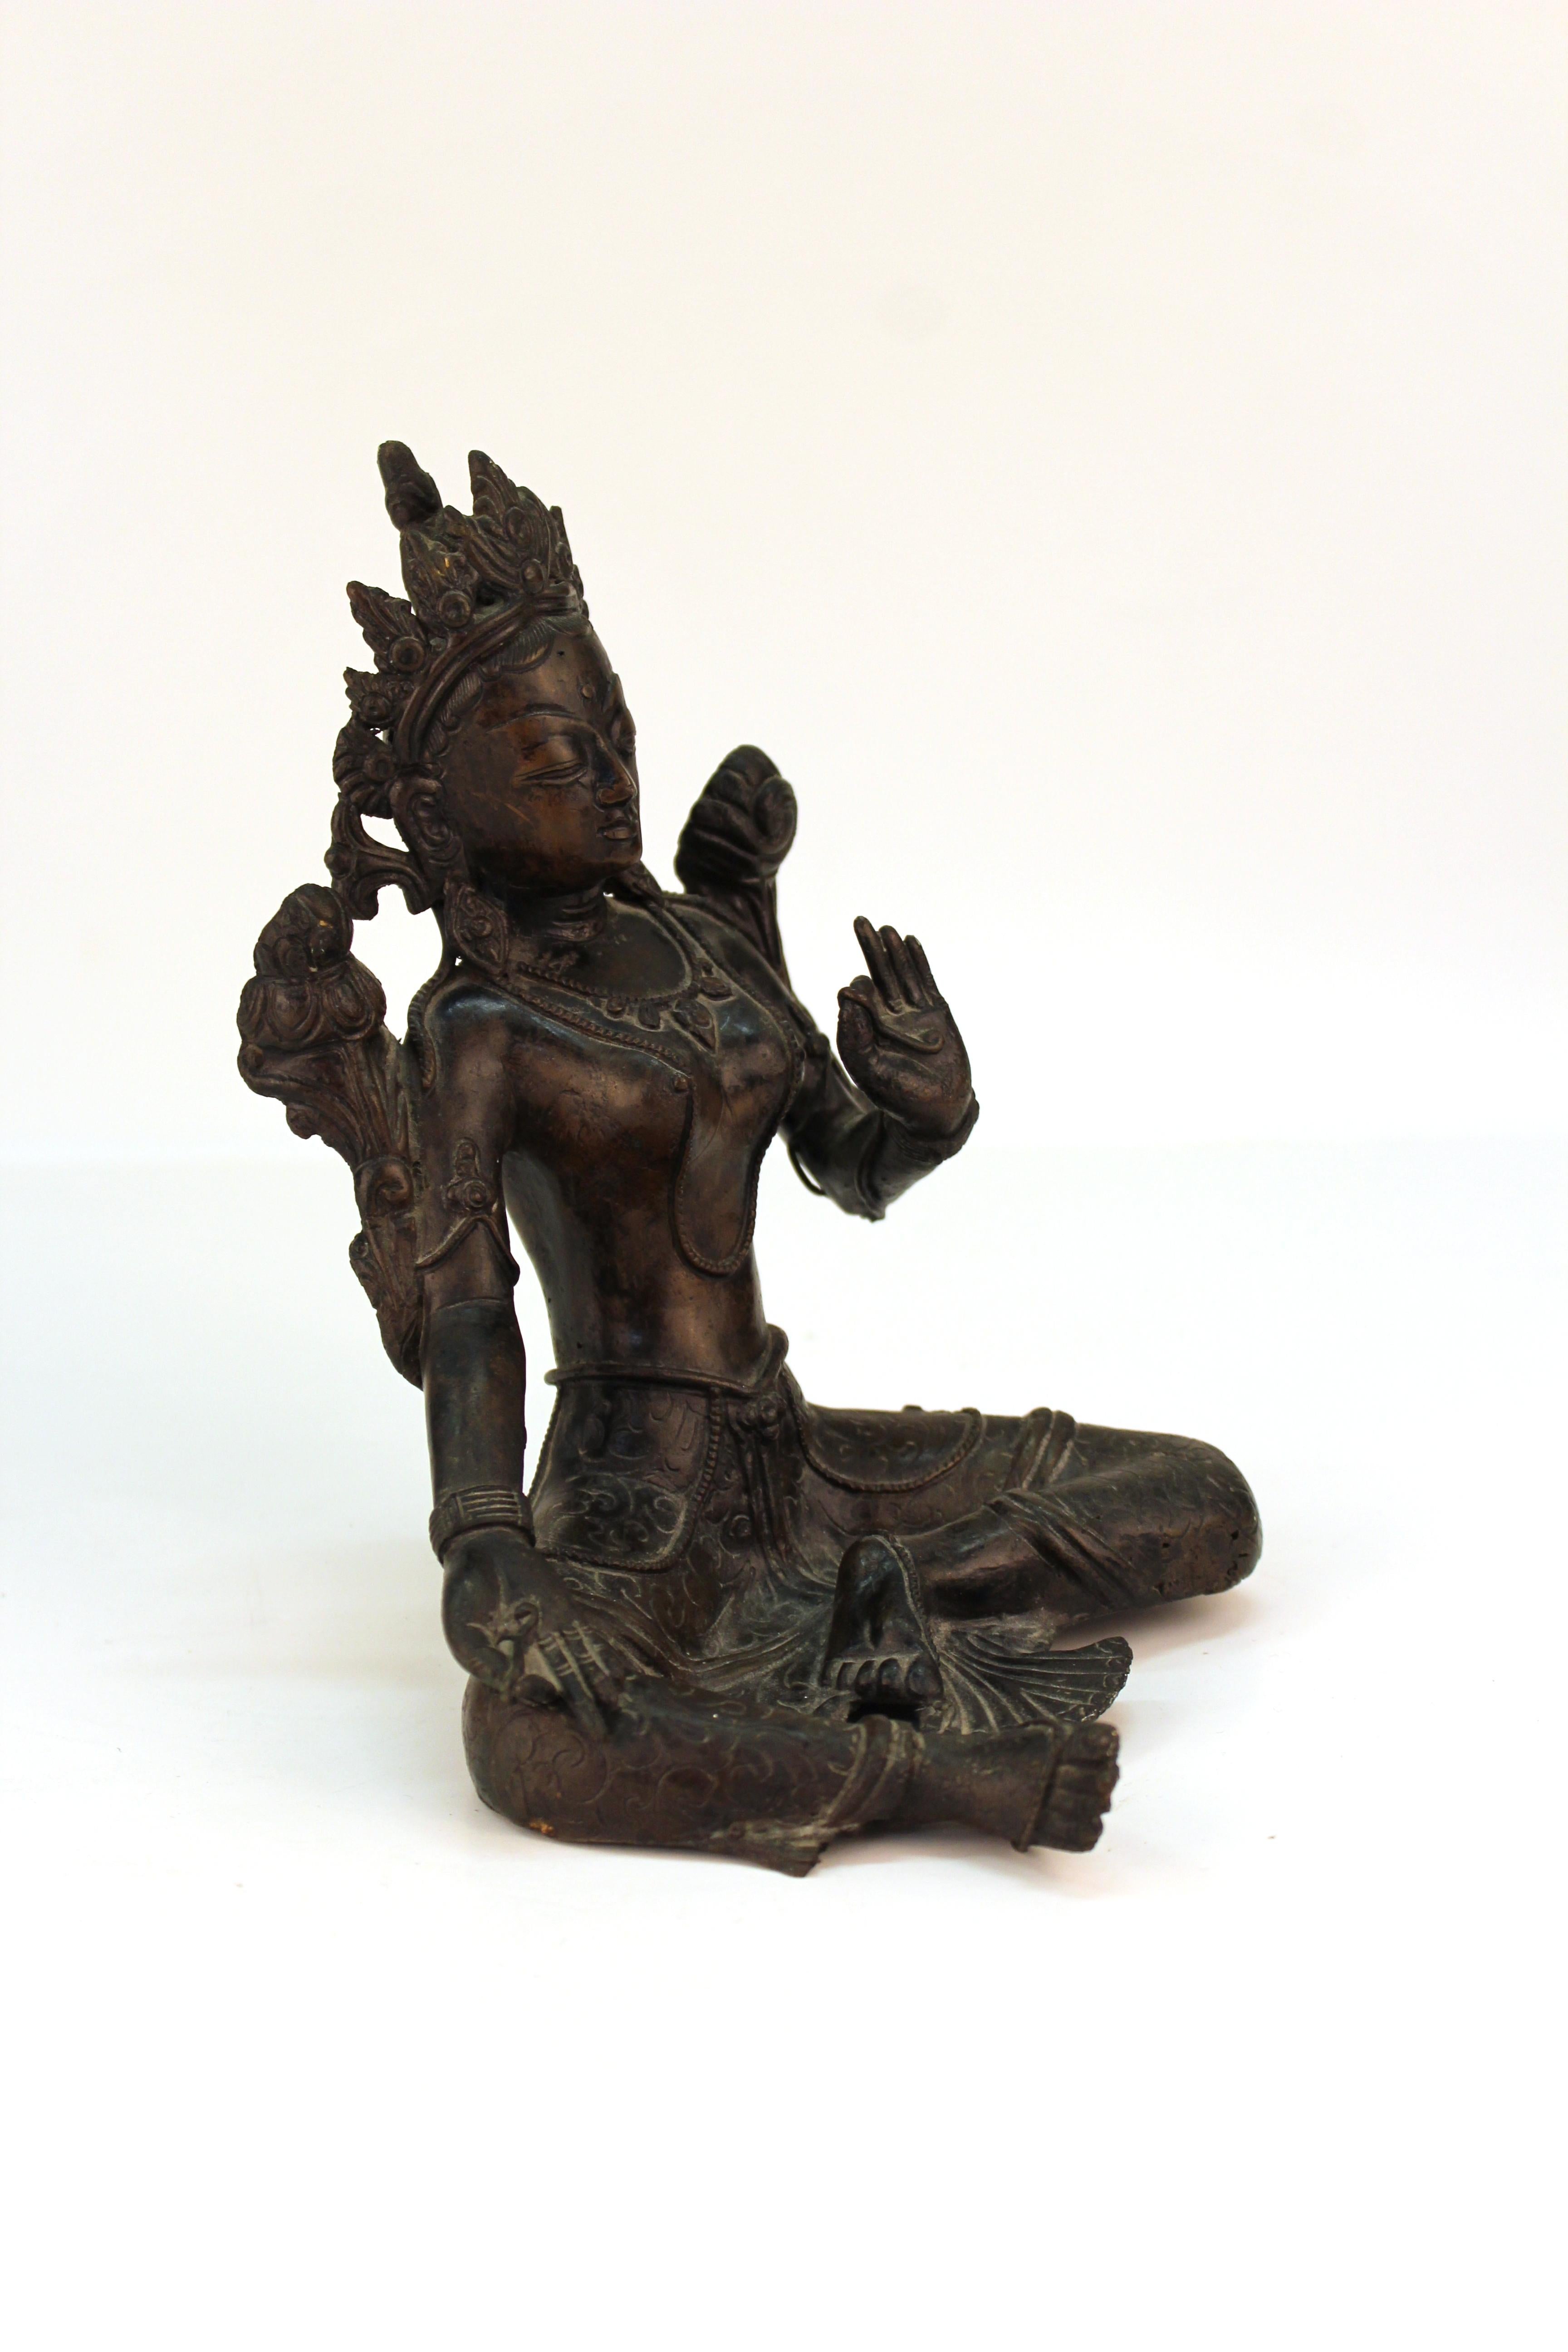 Tibetan bronzed metal Himalayan Buddhist sculpture depicting the seated Bodhisattva Tara in position of Abhaya mudra. The piece is in great vintage condition and has age-appropriate patina and wear.